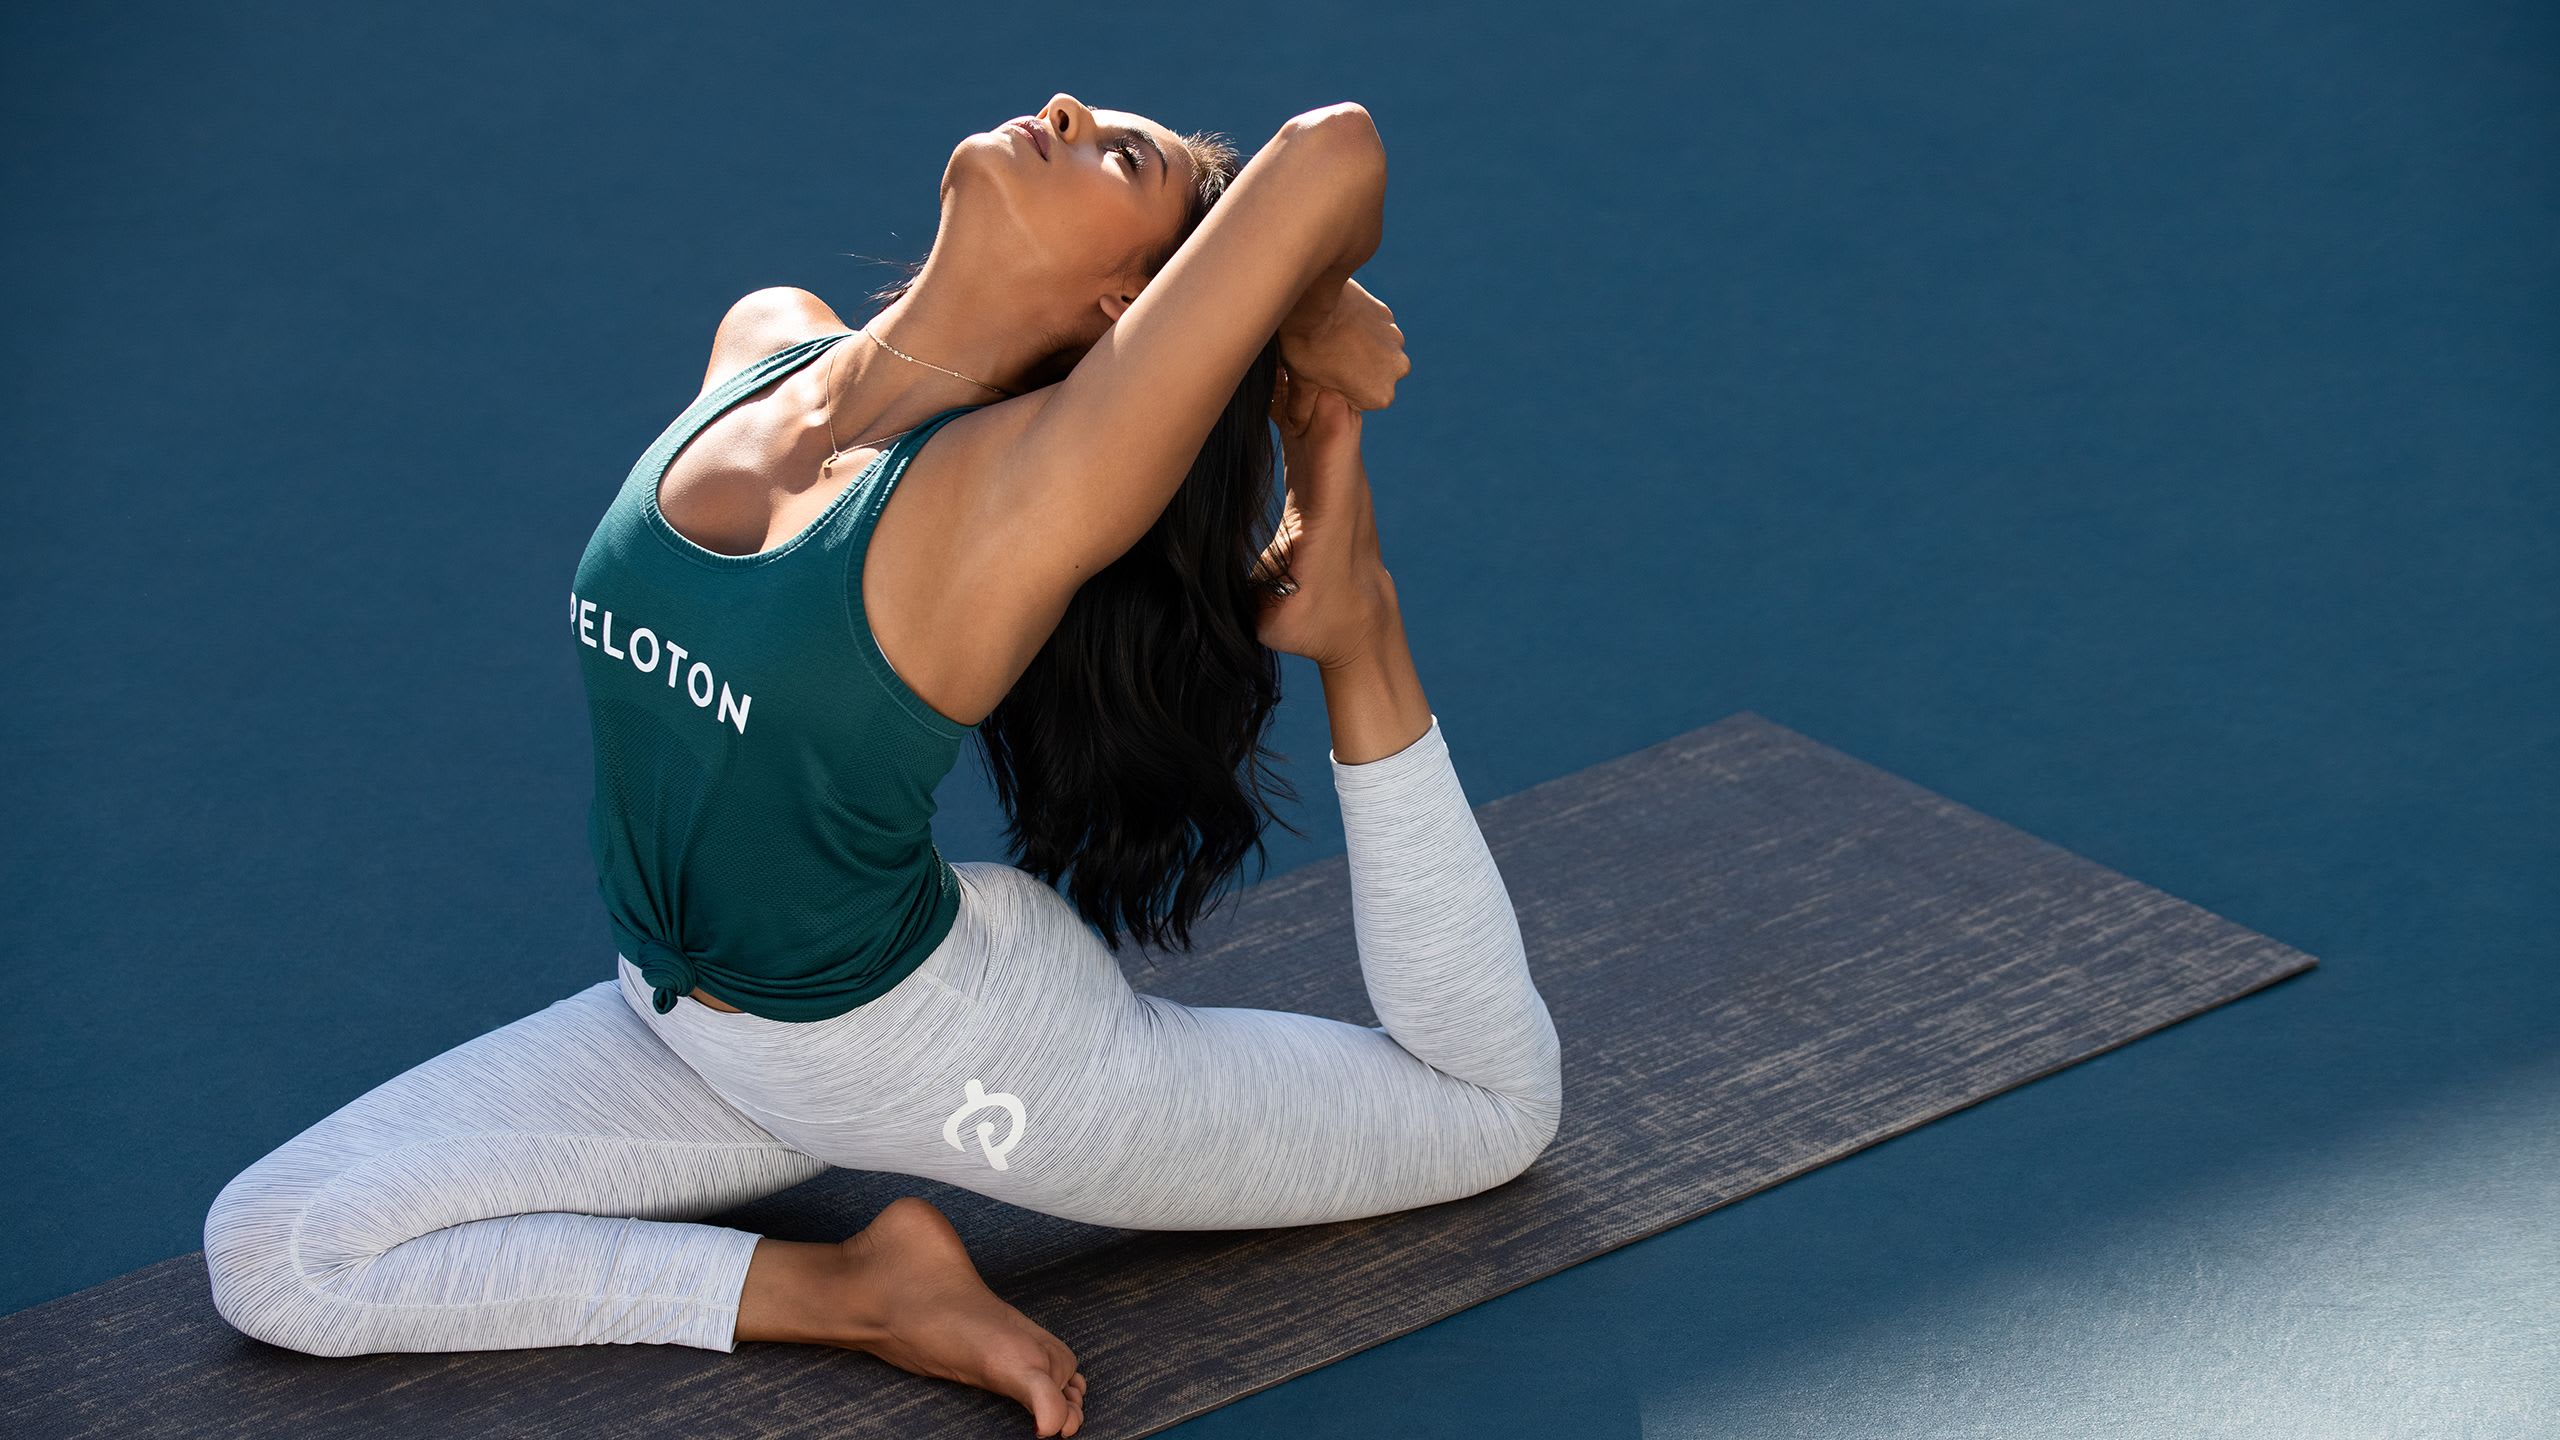 Yoga Isn’t Stretching: Here’s What You Need to Know About Recovery